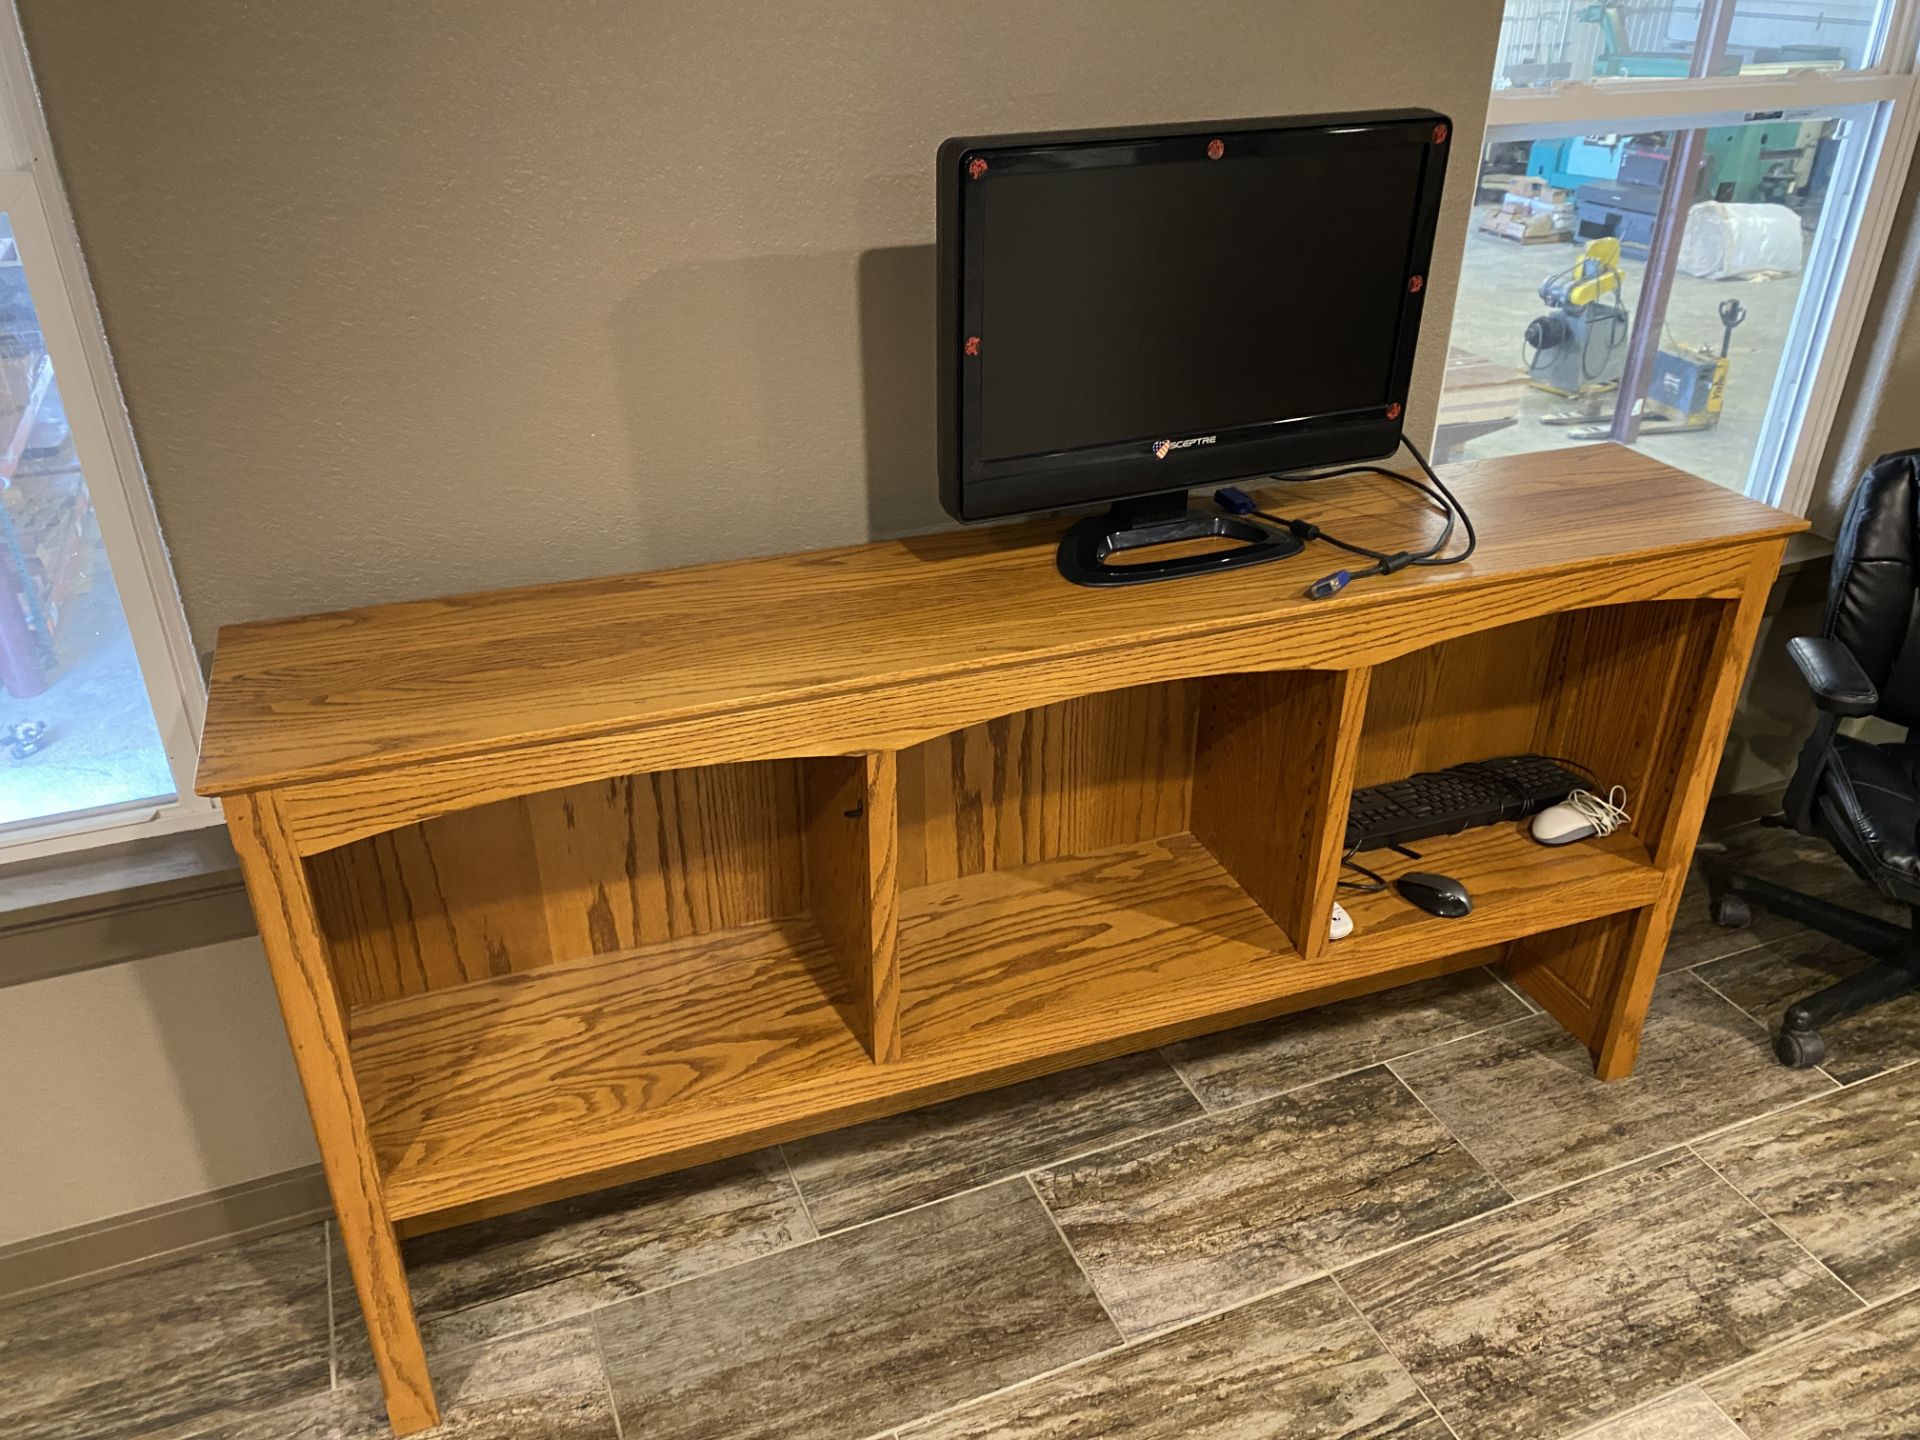 Monitor and Wooden Storage Shelf - Image 2 of 4